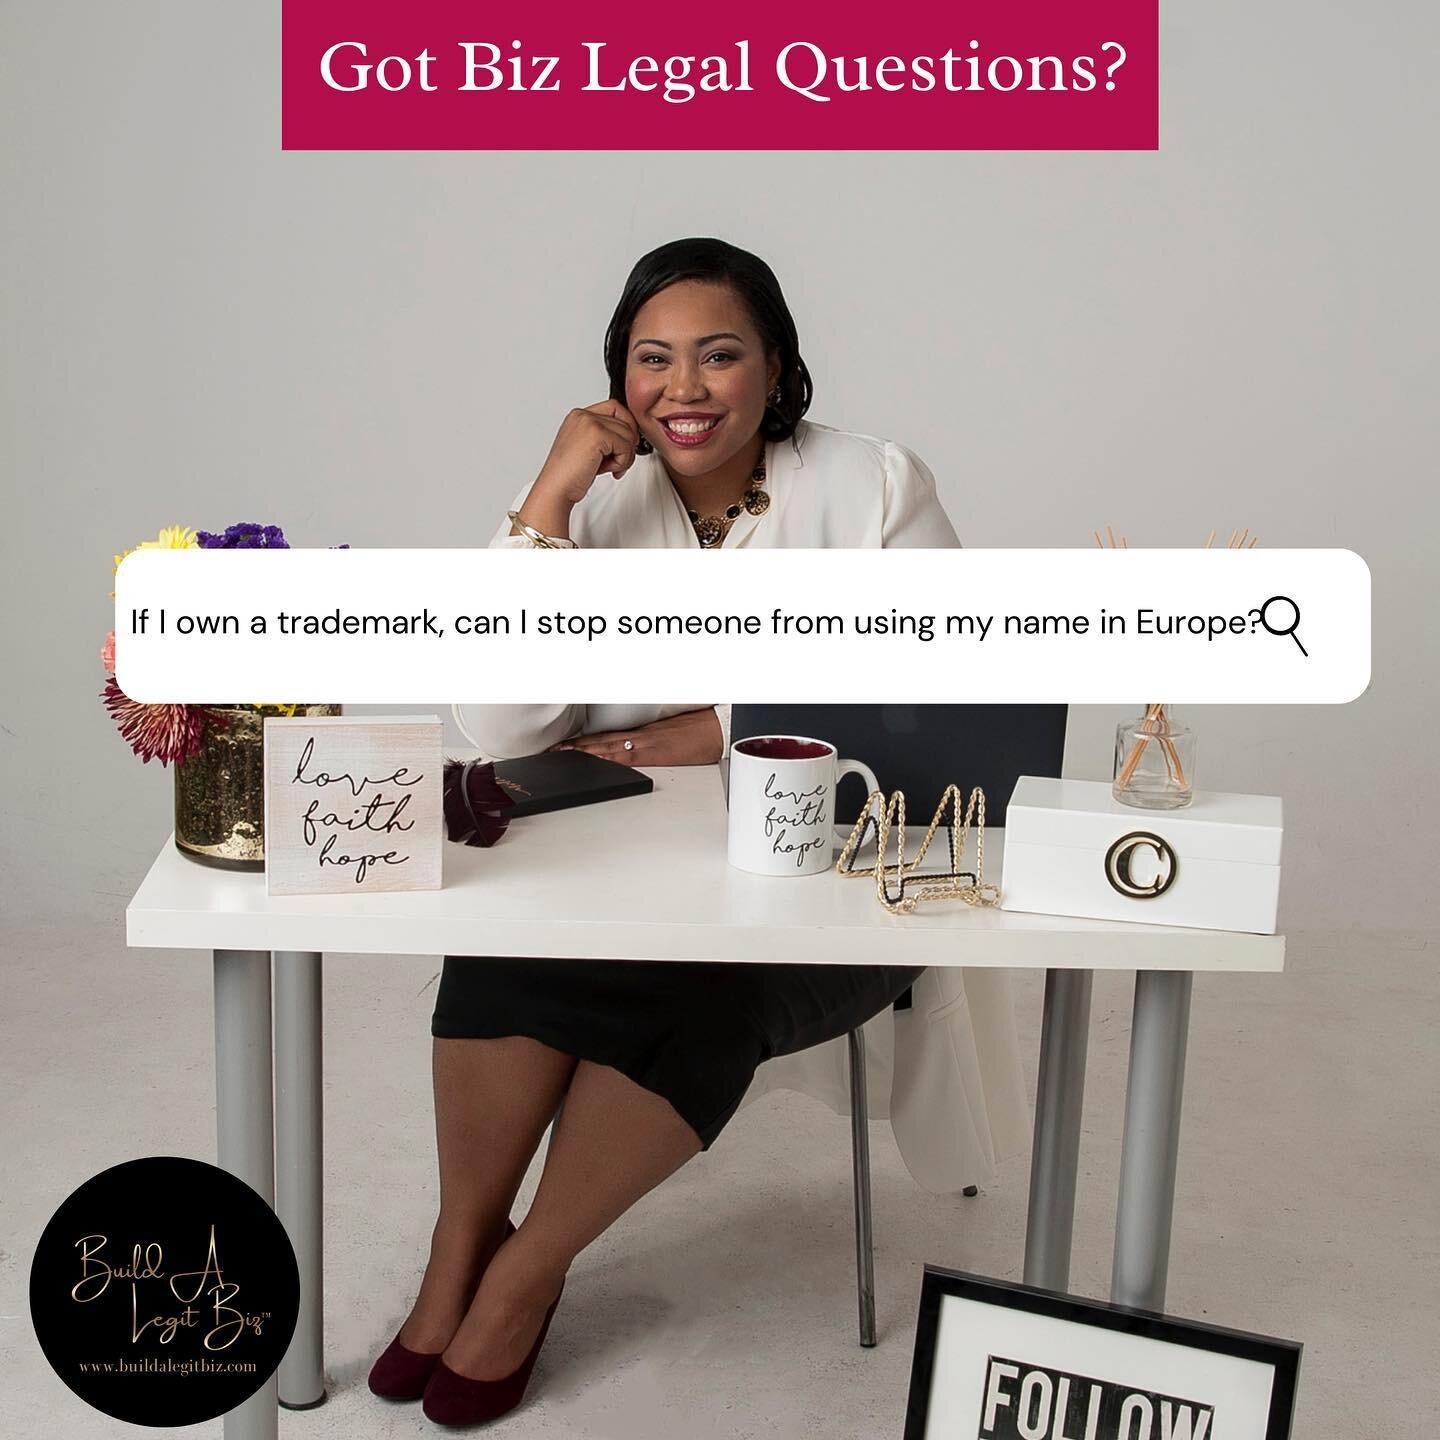 Happy Friday, beautiful folks!!

It&rsquo;s Got Biz Legal Questions? Friday and we have another question. (Question in photo)

Here&rsquo;s my answer:

If you have a U.S. registered trademark, your trademark protects you and gives you exclusivity wit